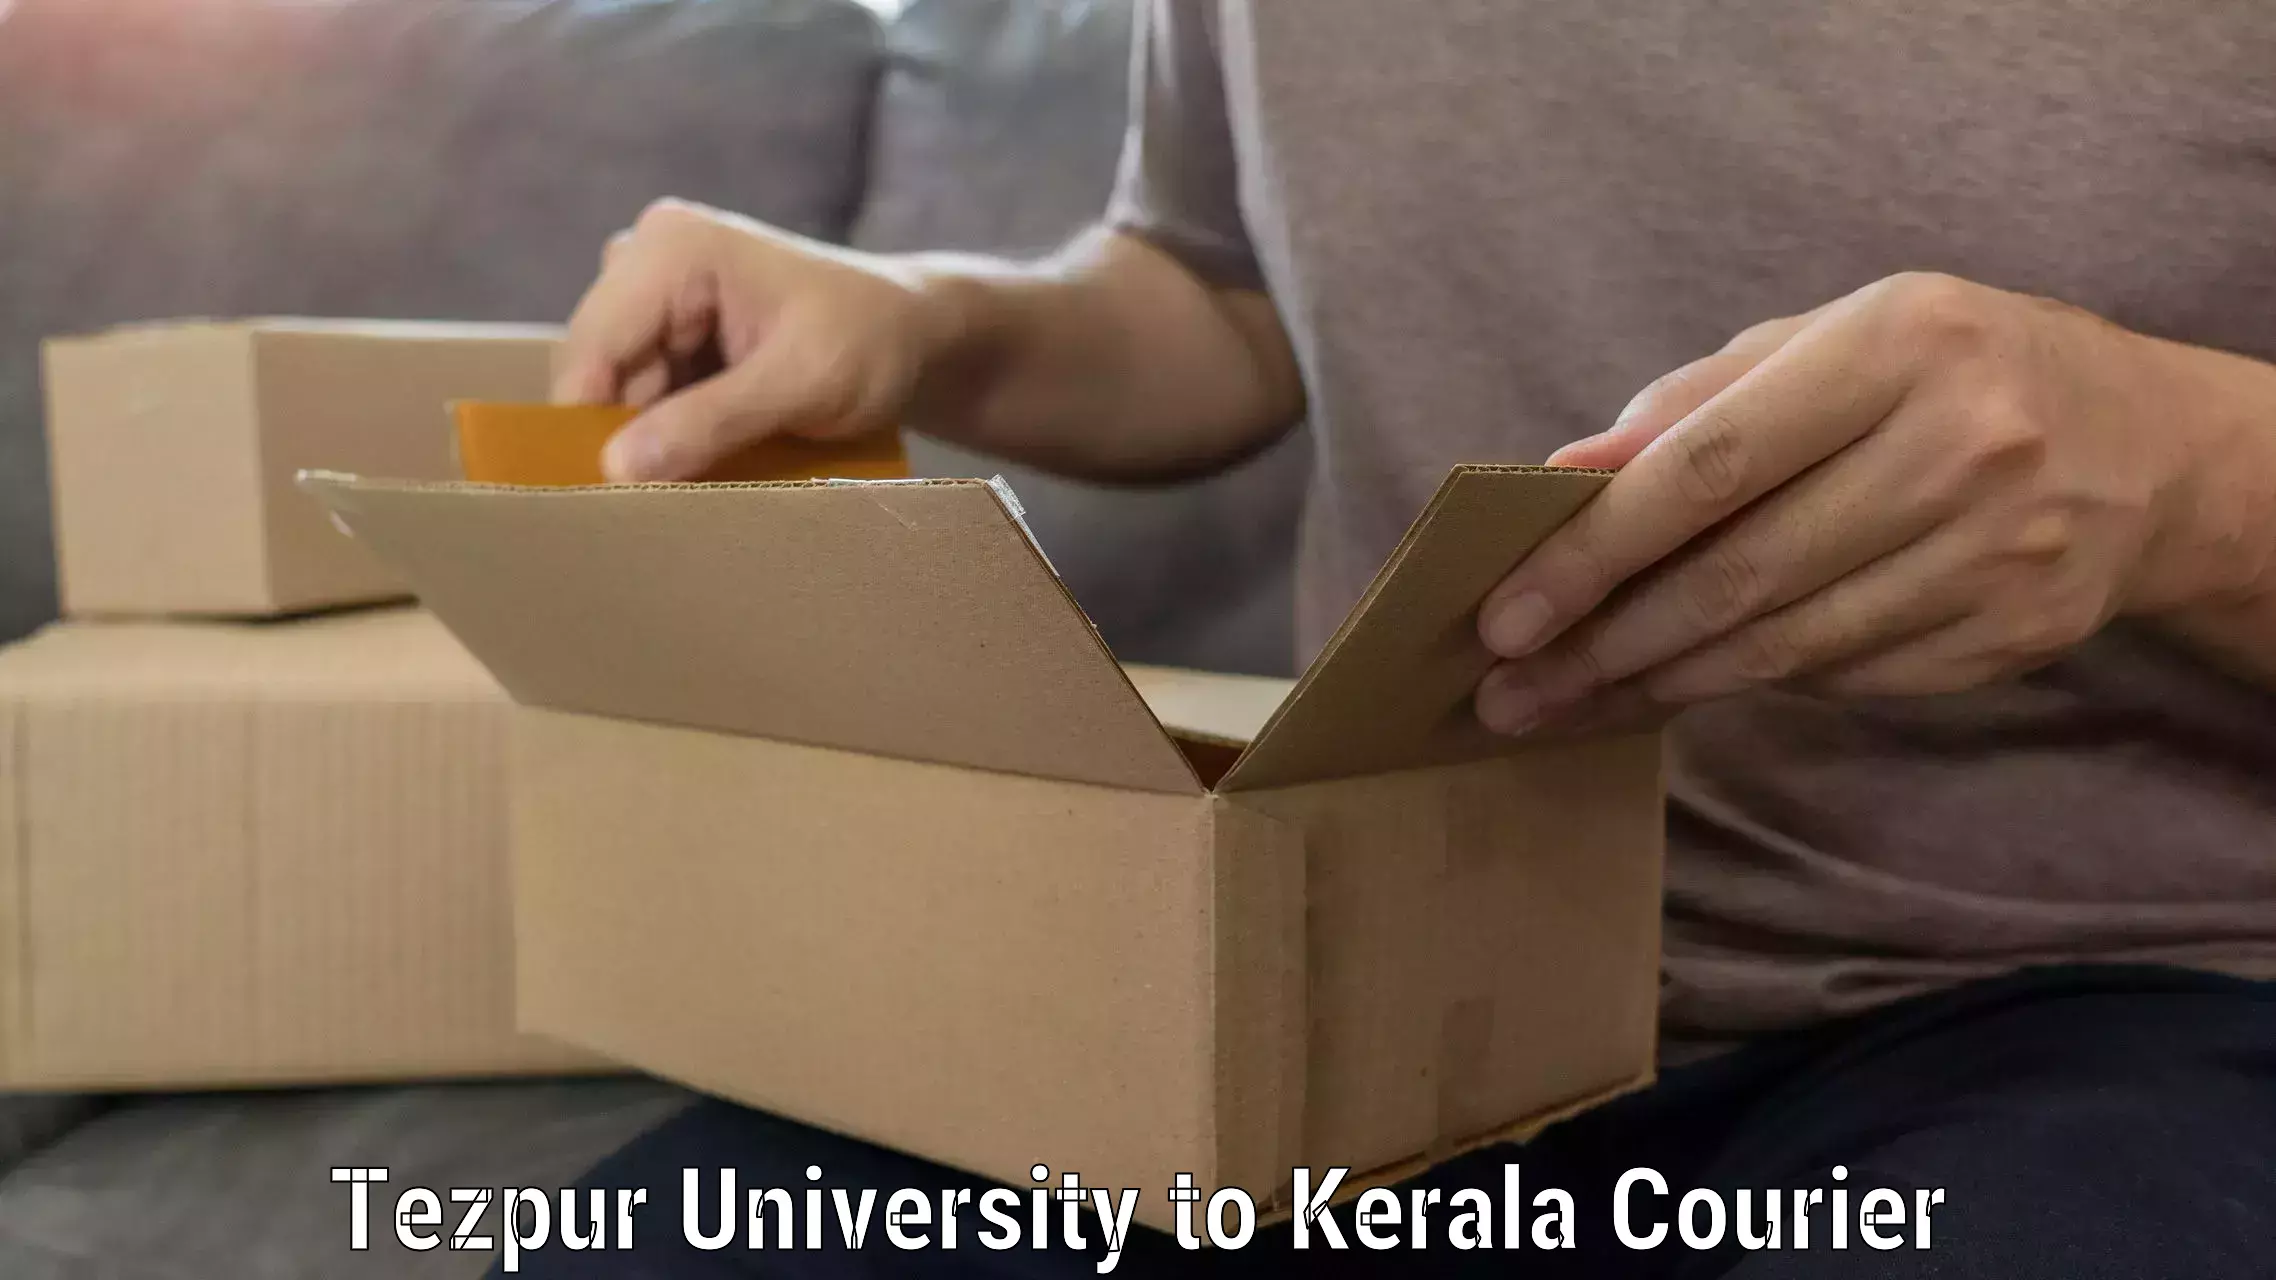 Furniture transport solutions Tezpur University to Iritty